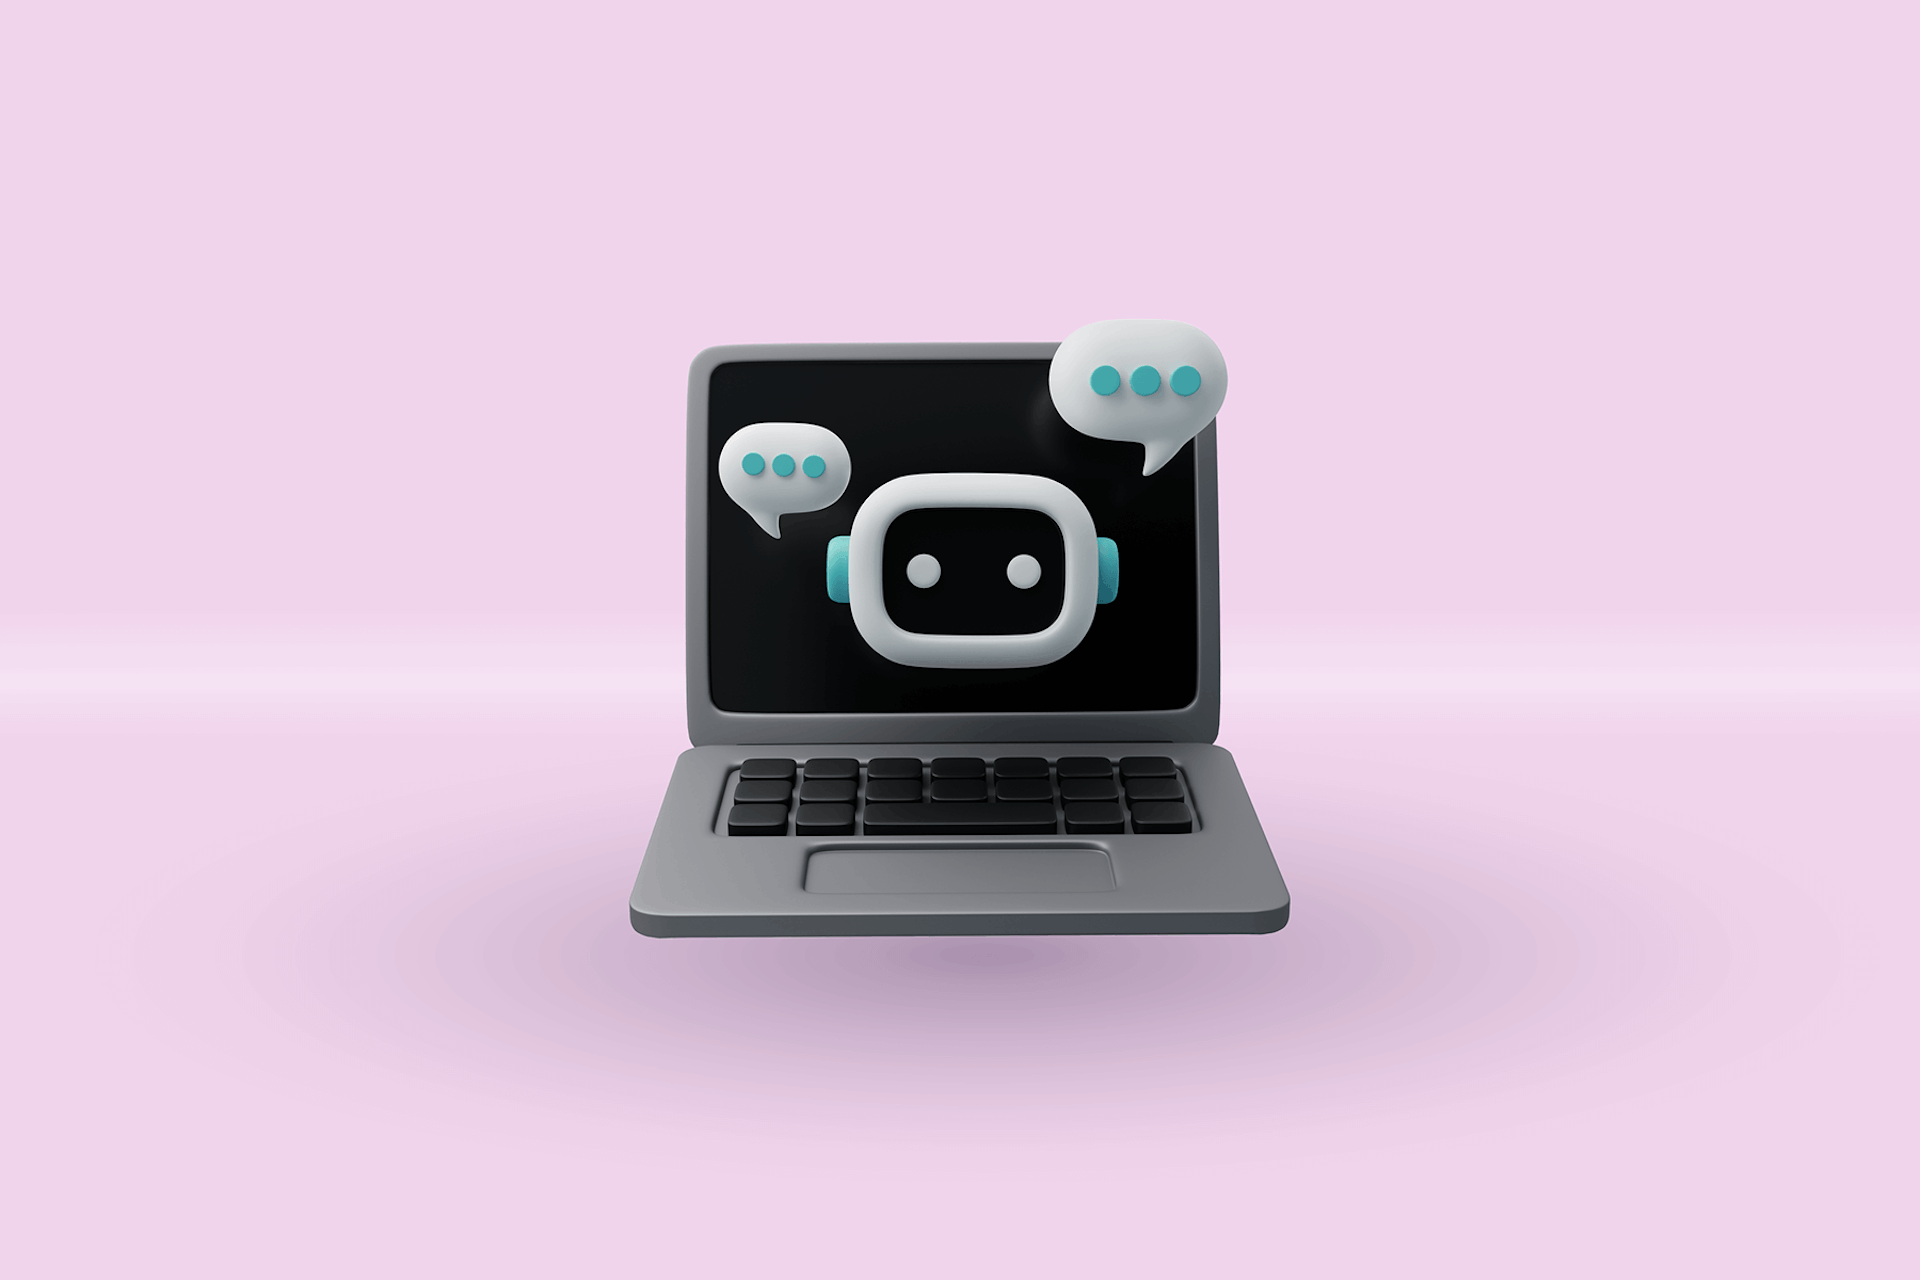 An illustration of an AI chatbot inside a laptop representing PR automation